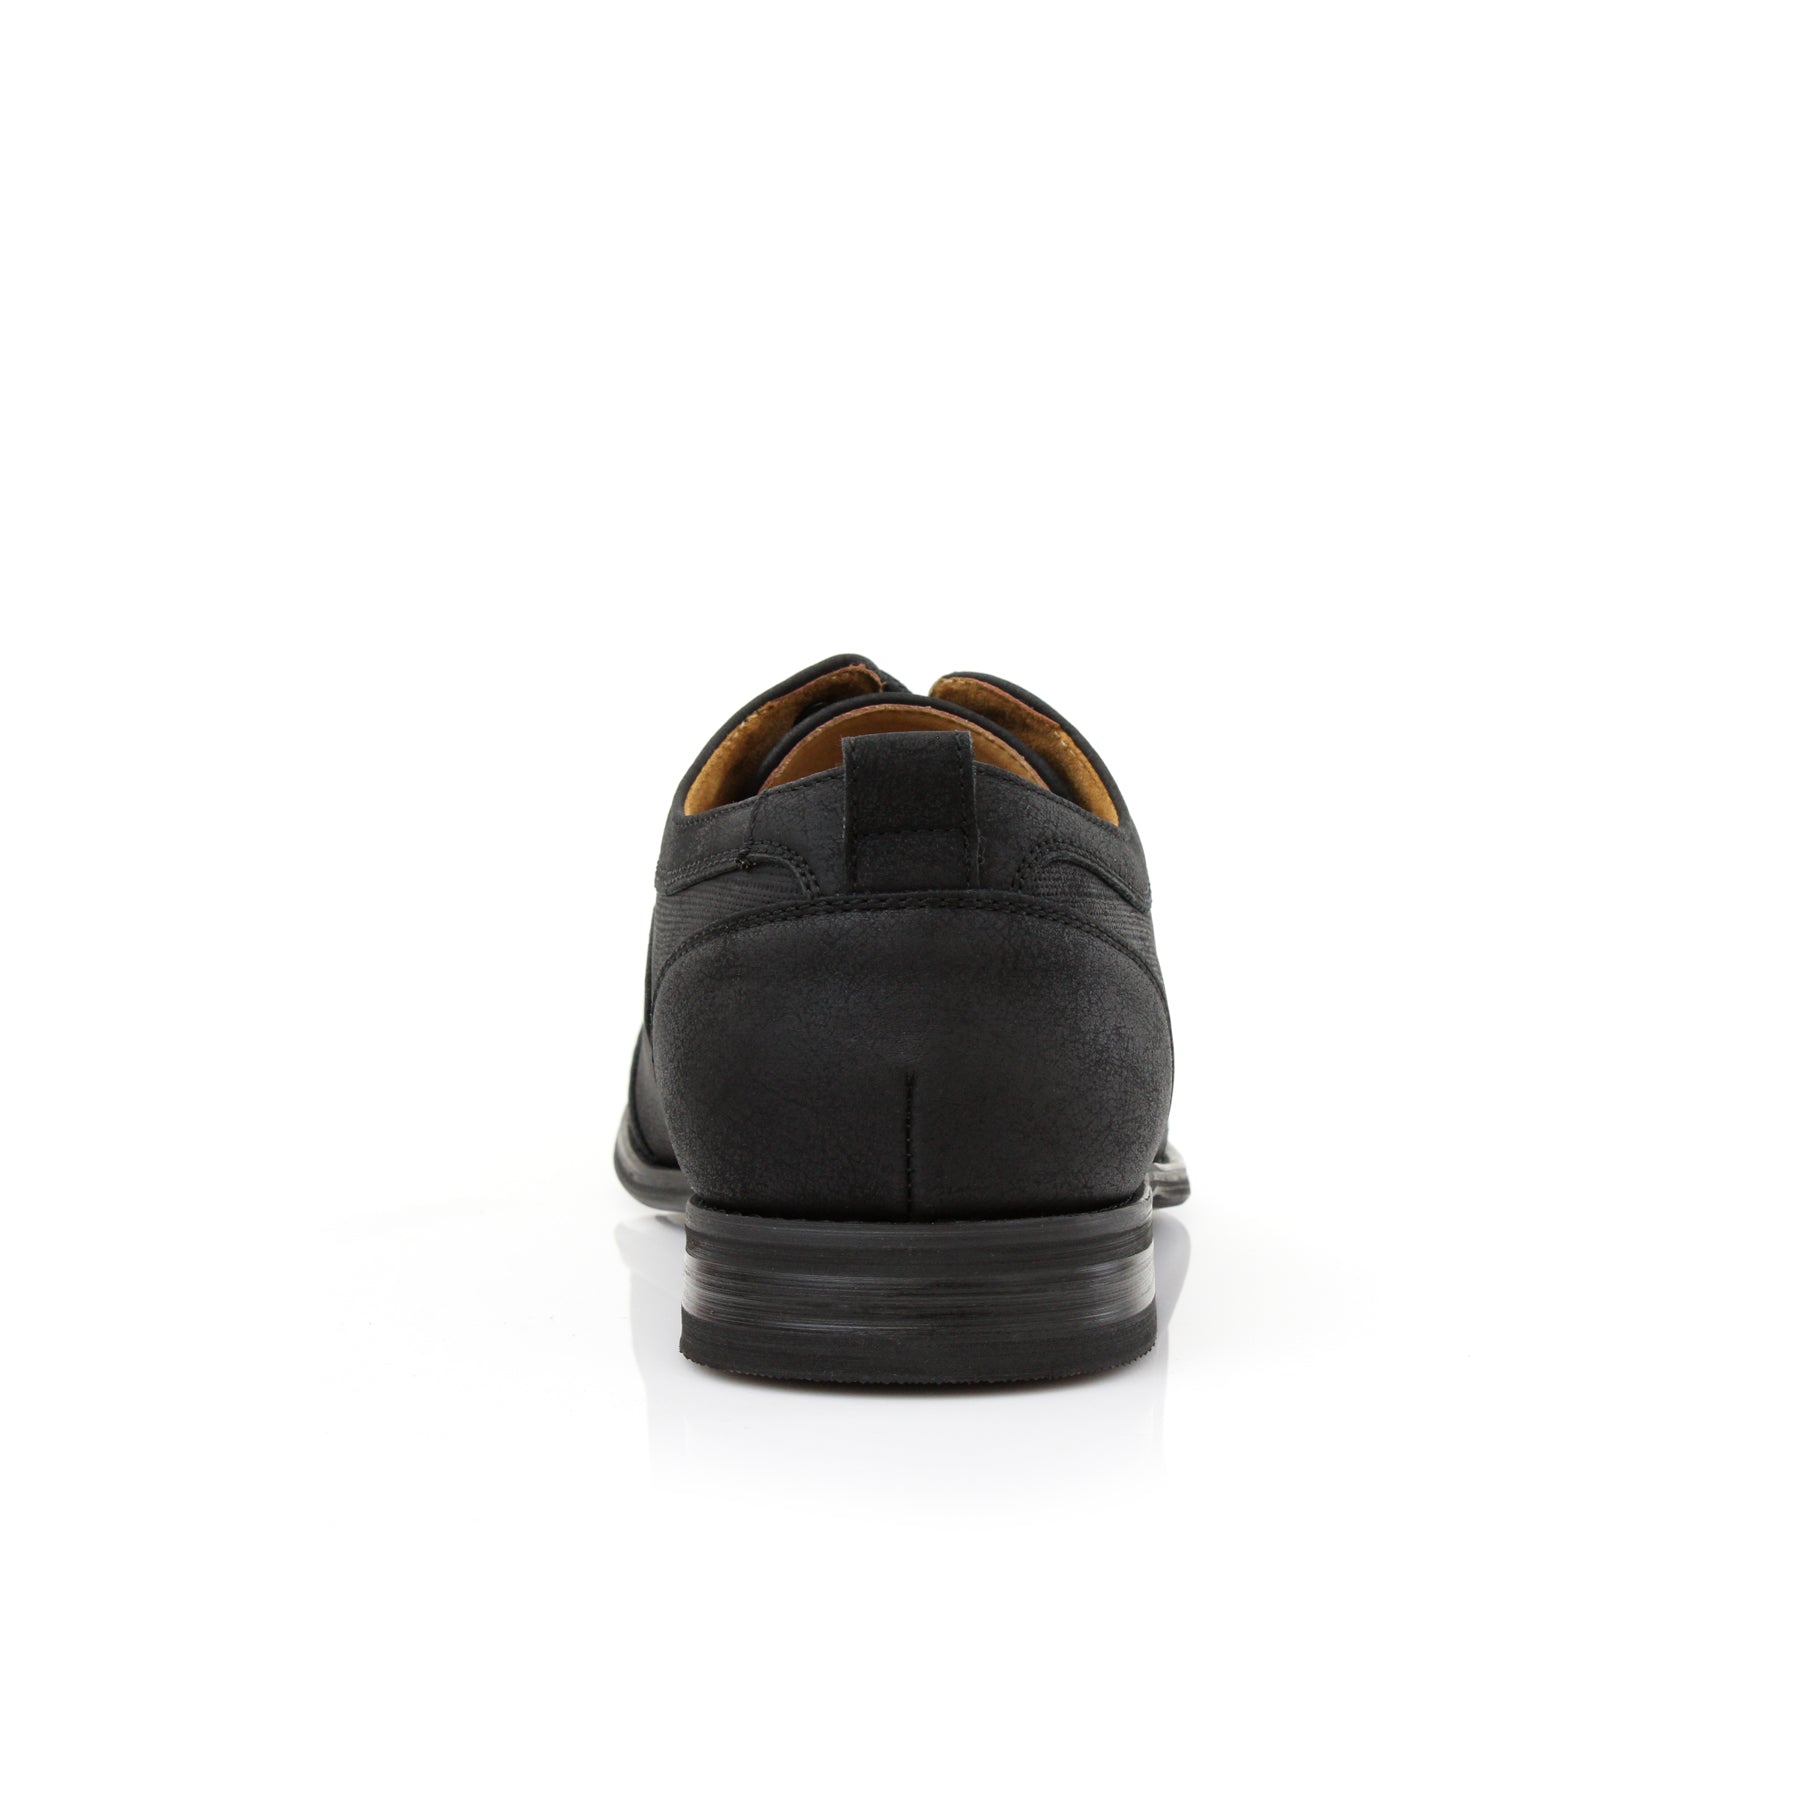 Duo-textured Cap-Toe Derby Shoes | Blake by Ferro Aldo | Conal Footwear | Back Angle View